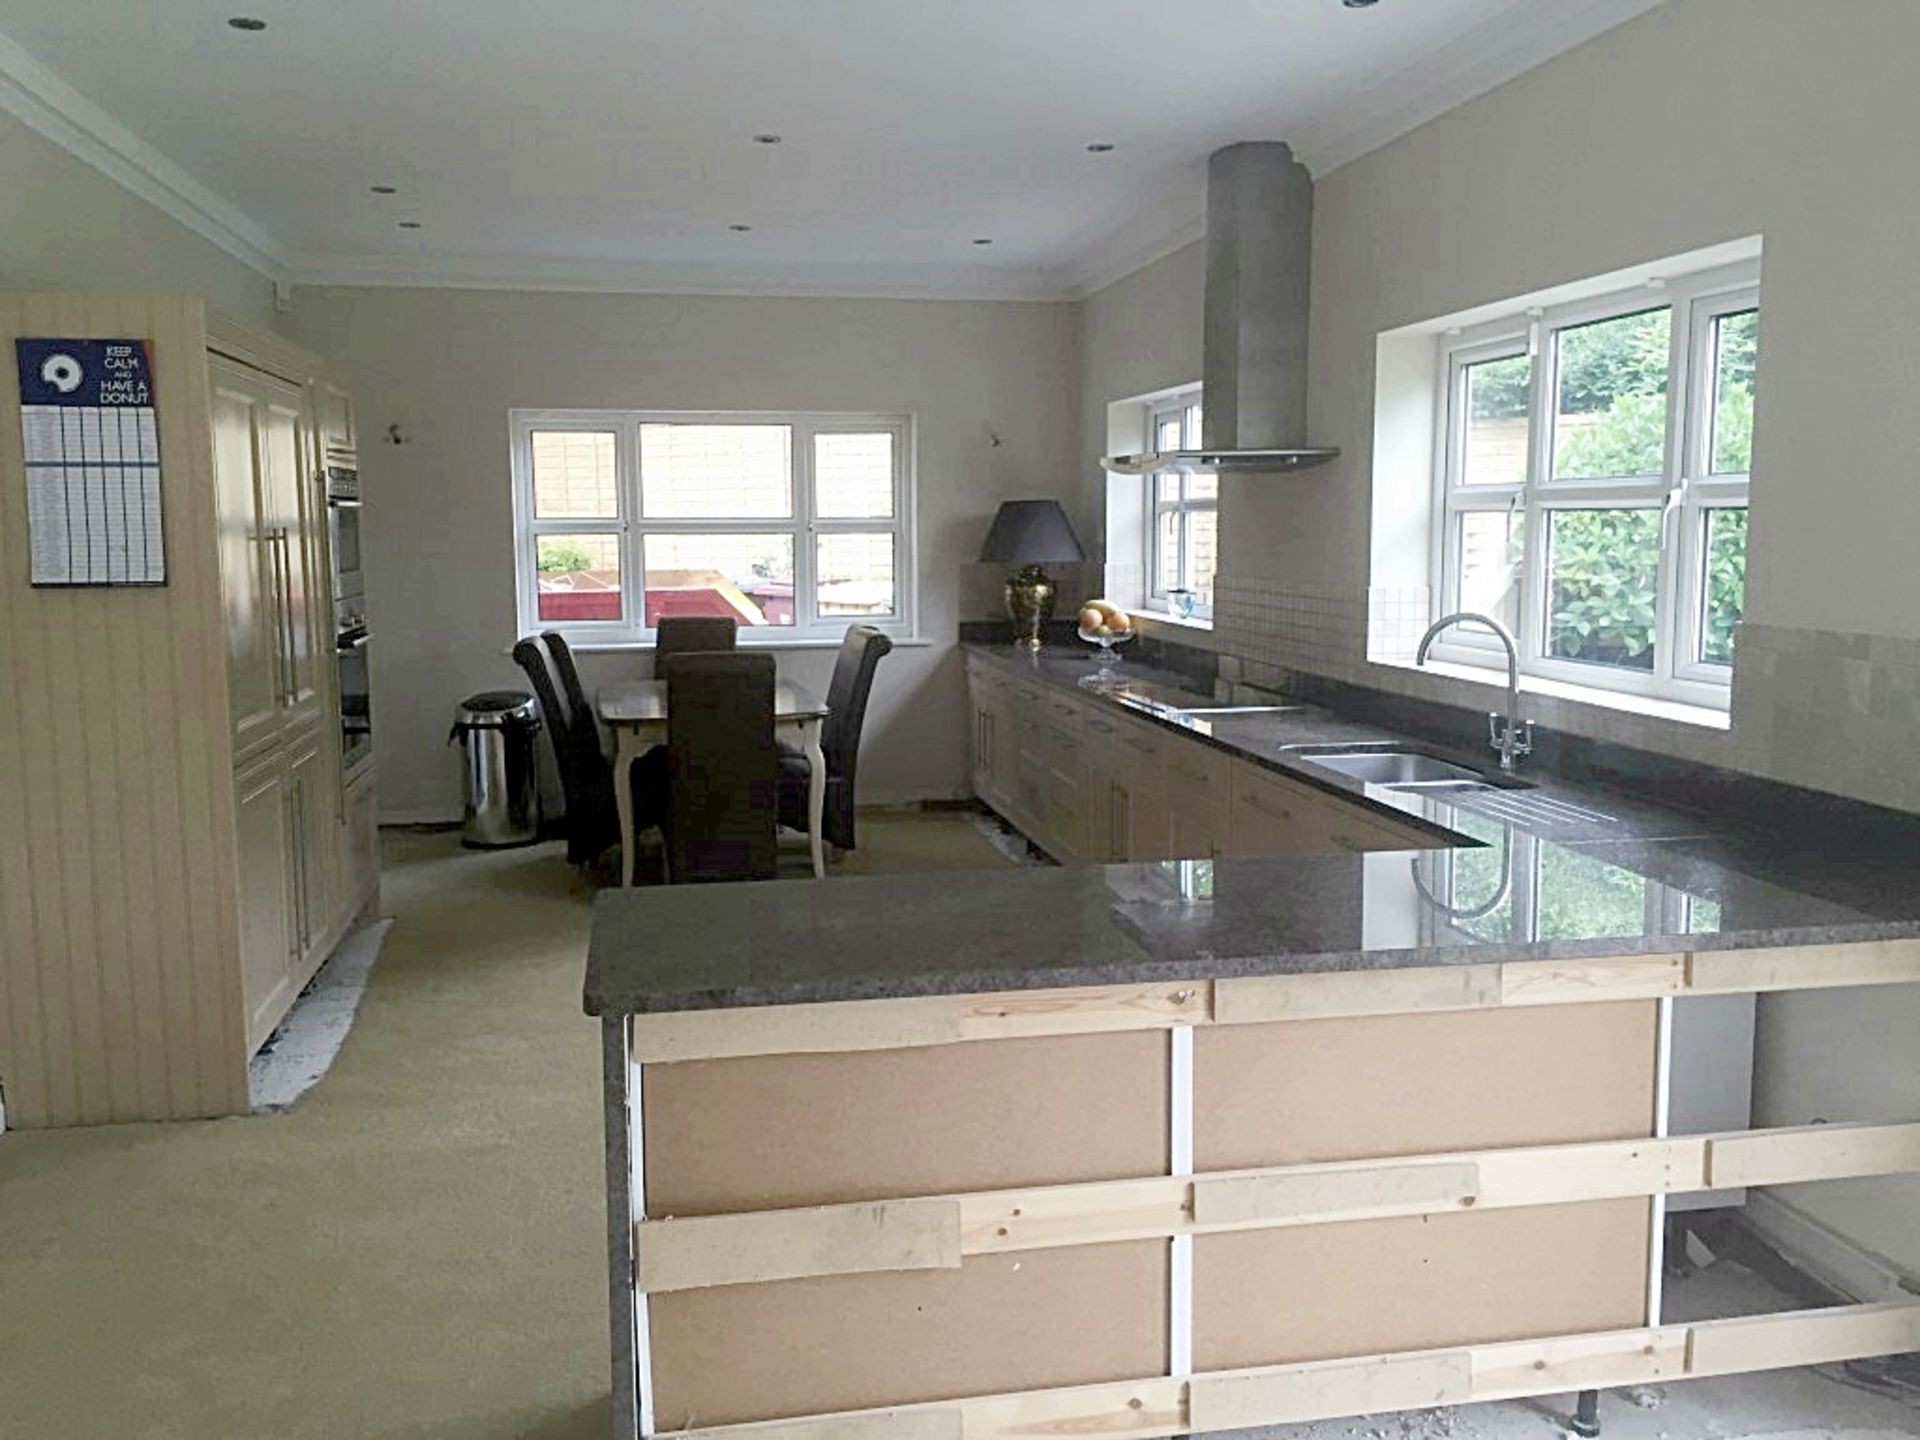 1 x Magnet Solid Wood Kitchen With Beautiful Granite Worktops, Neff and Bosch Appliances and Soft